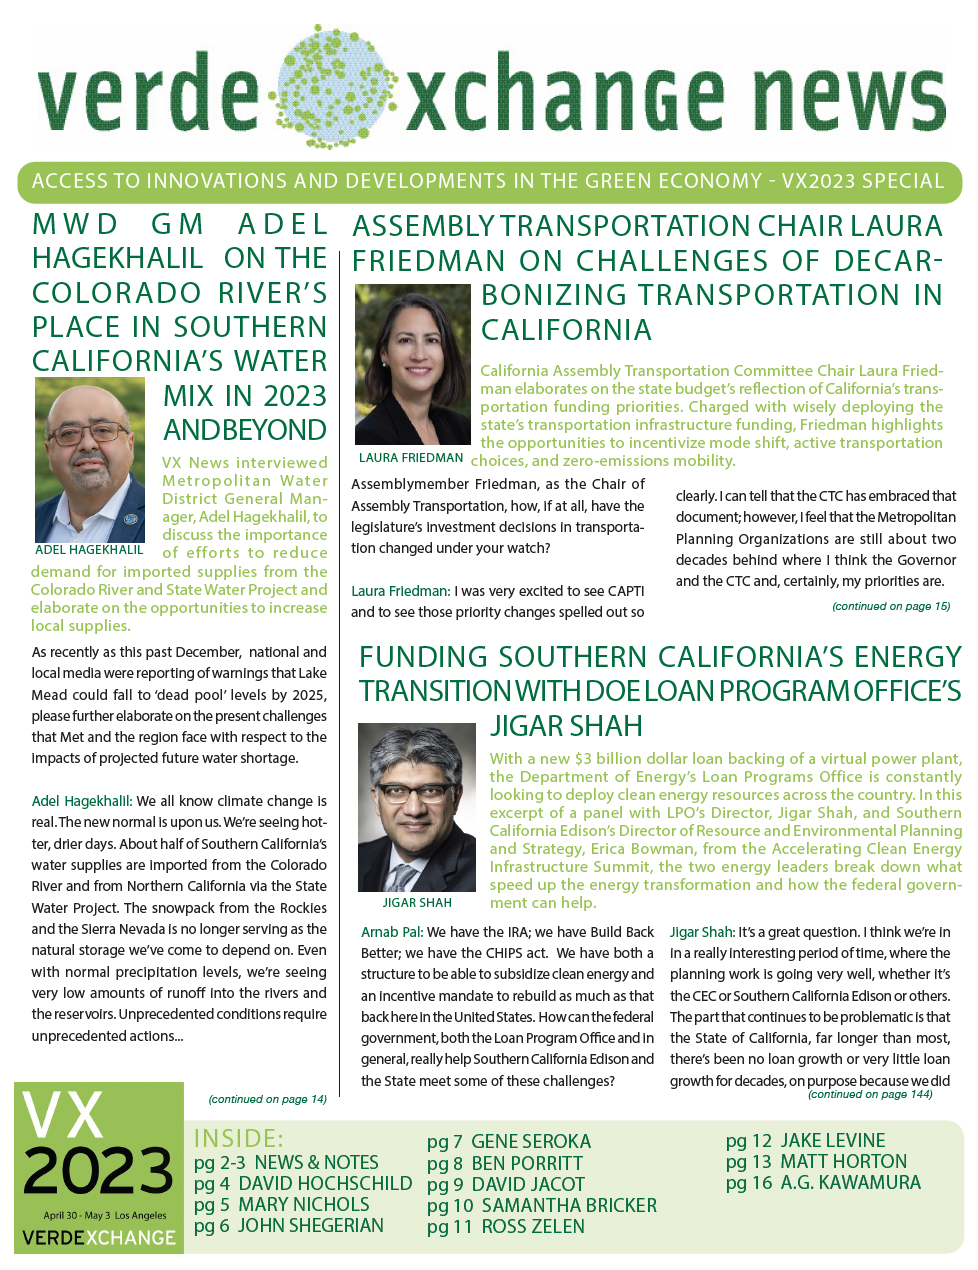 VX News Front Page image of newsletter with headlines & headshots